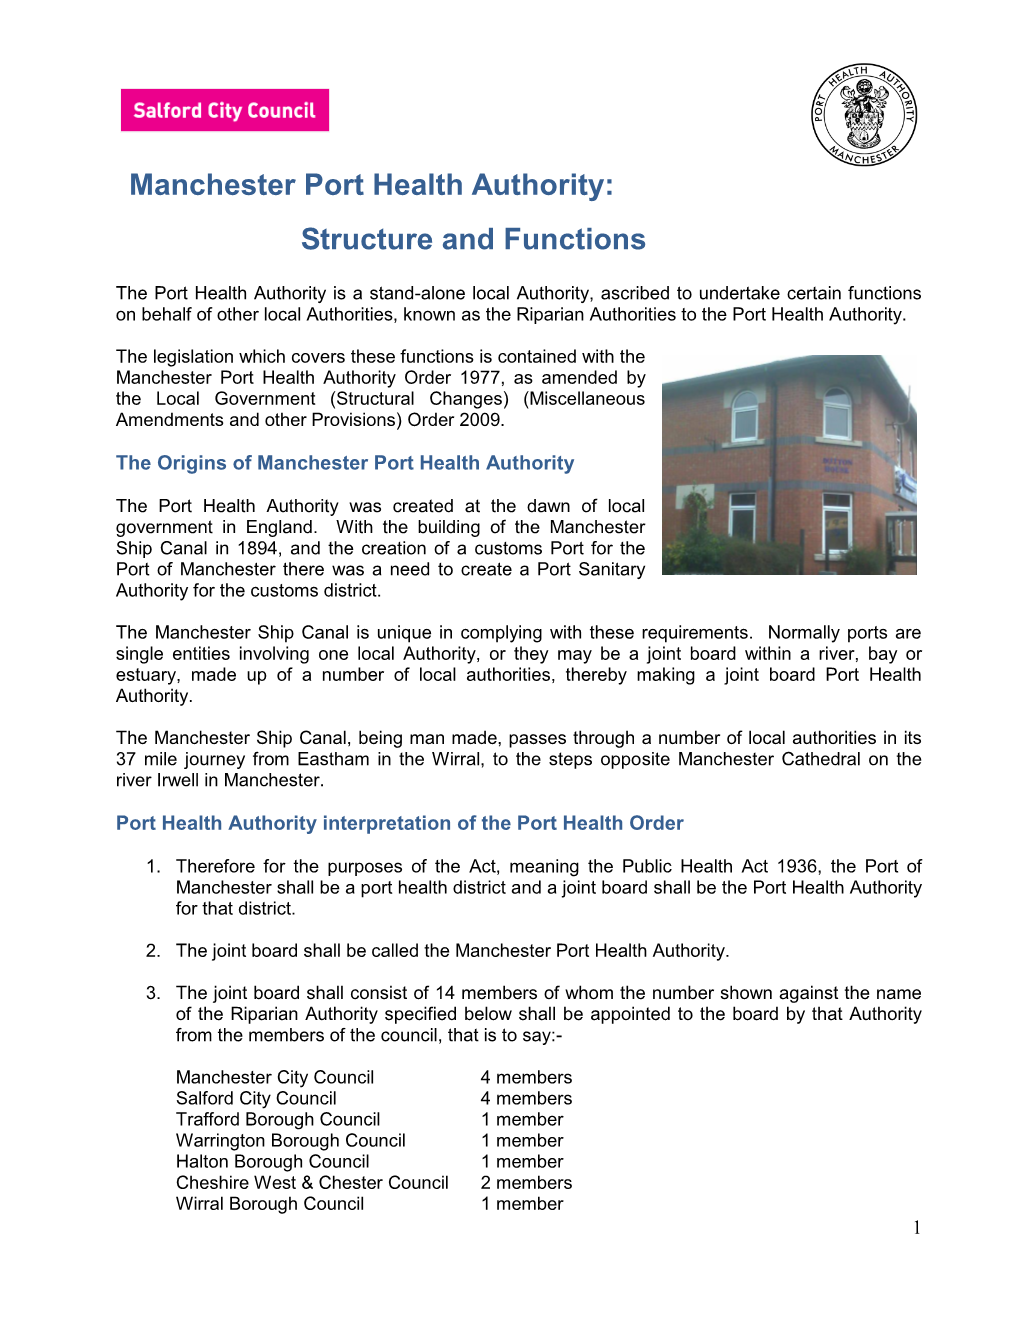 Manchester Port Health Authority: Structure and Functions